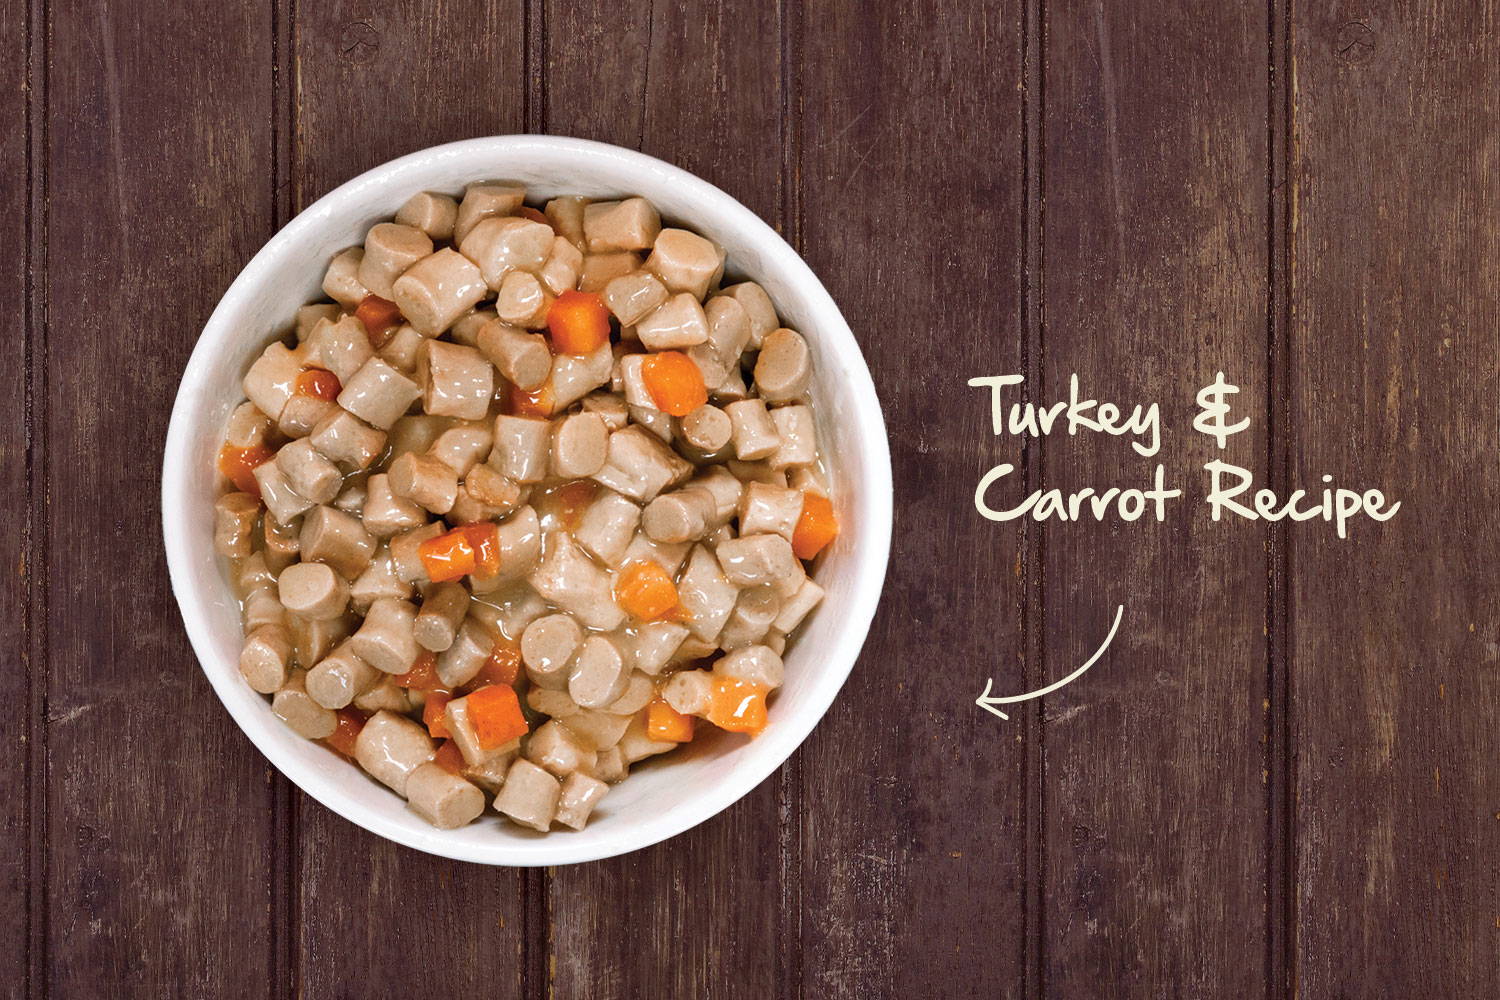 Photograph of Turkey & Carrot Stew in a dog bowl